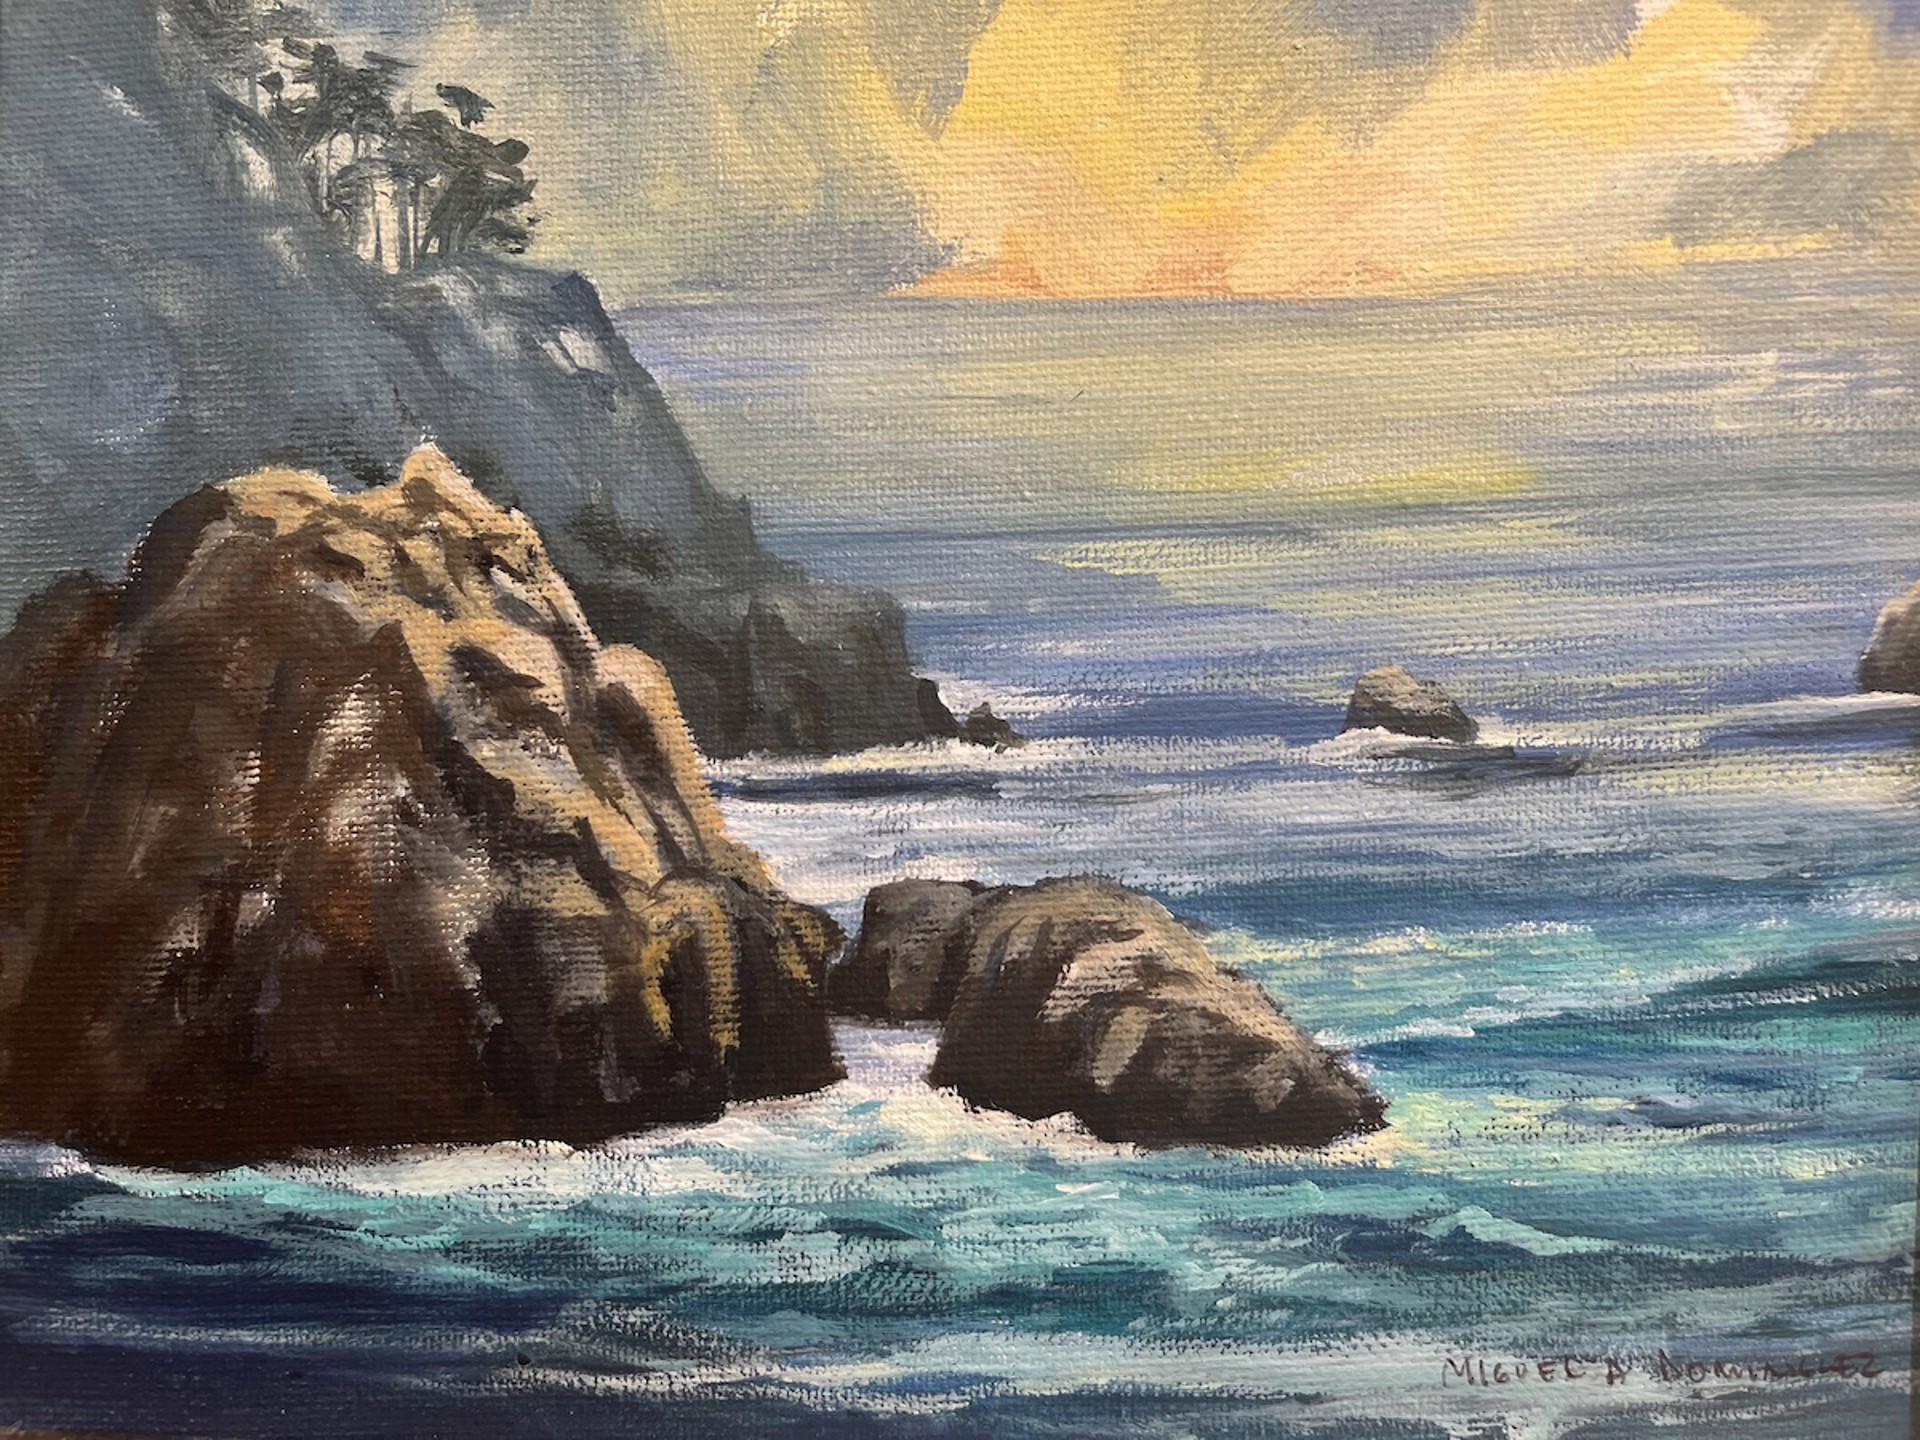 Sunset at Point Lobos by Miguel A. Dominguez